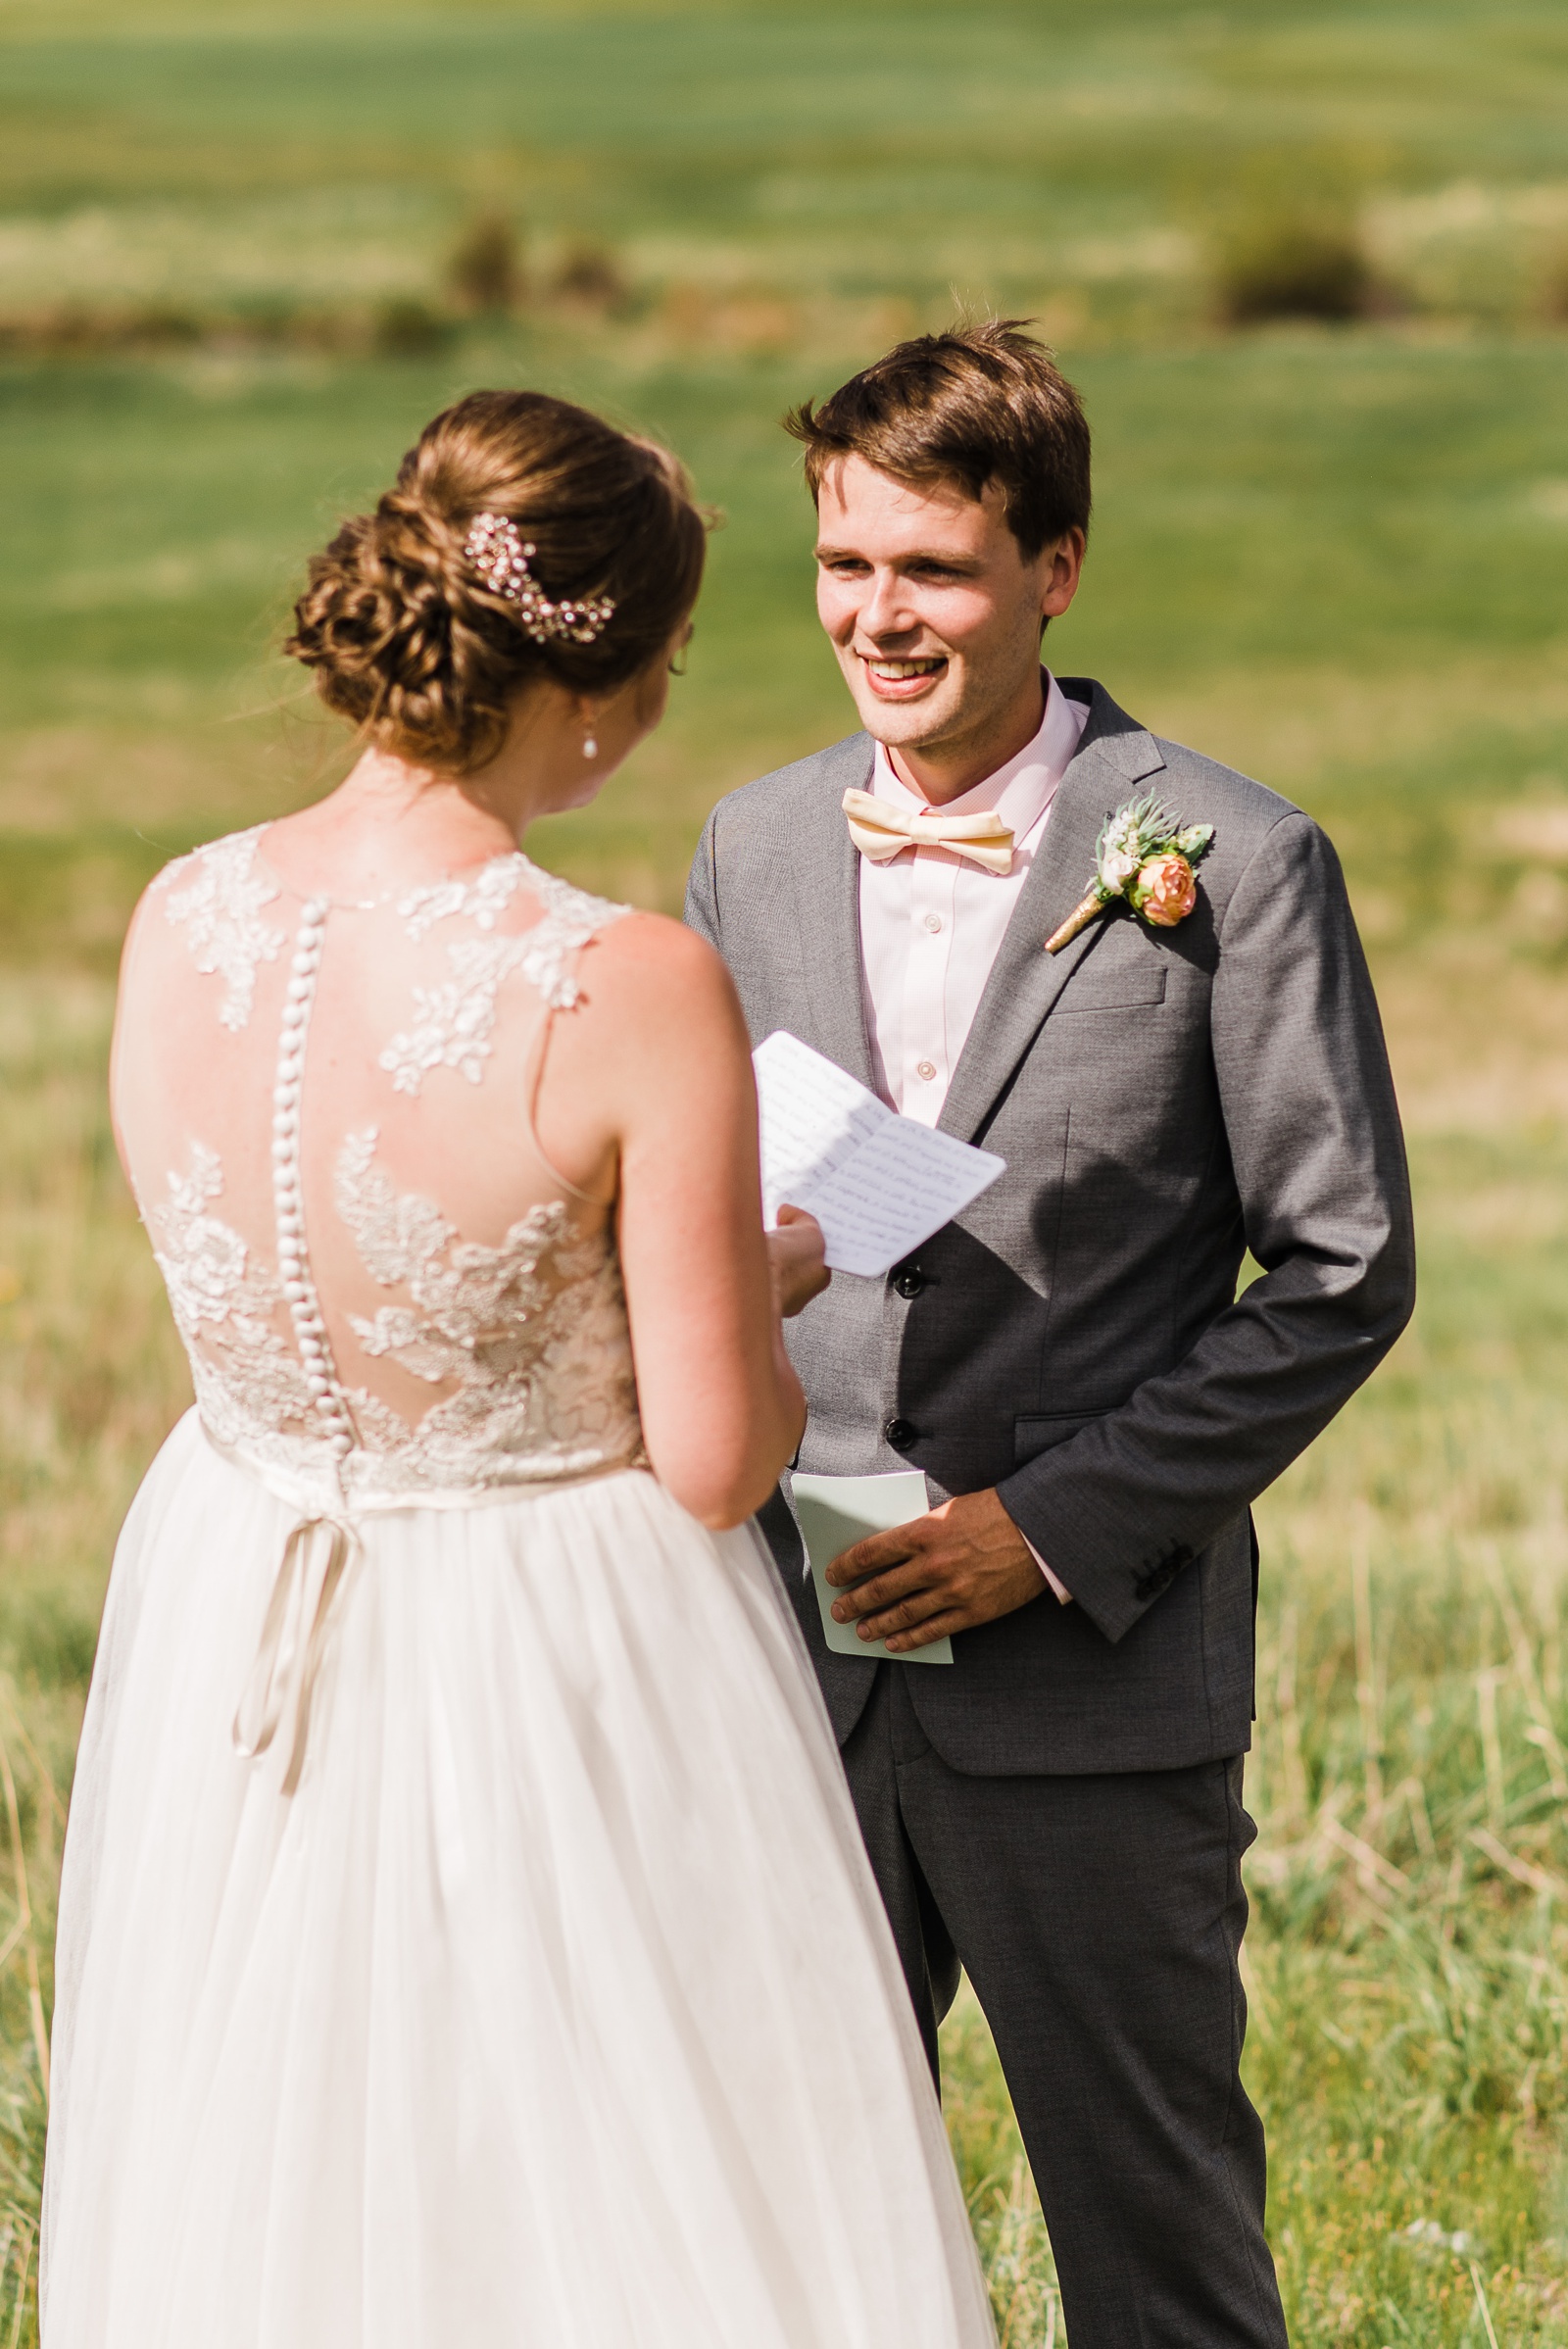 Groom smiling during vows